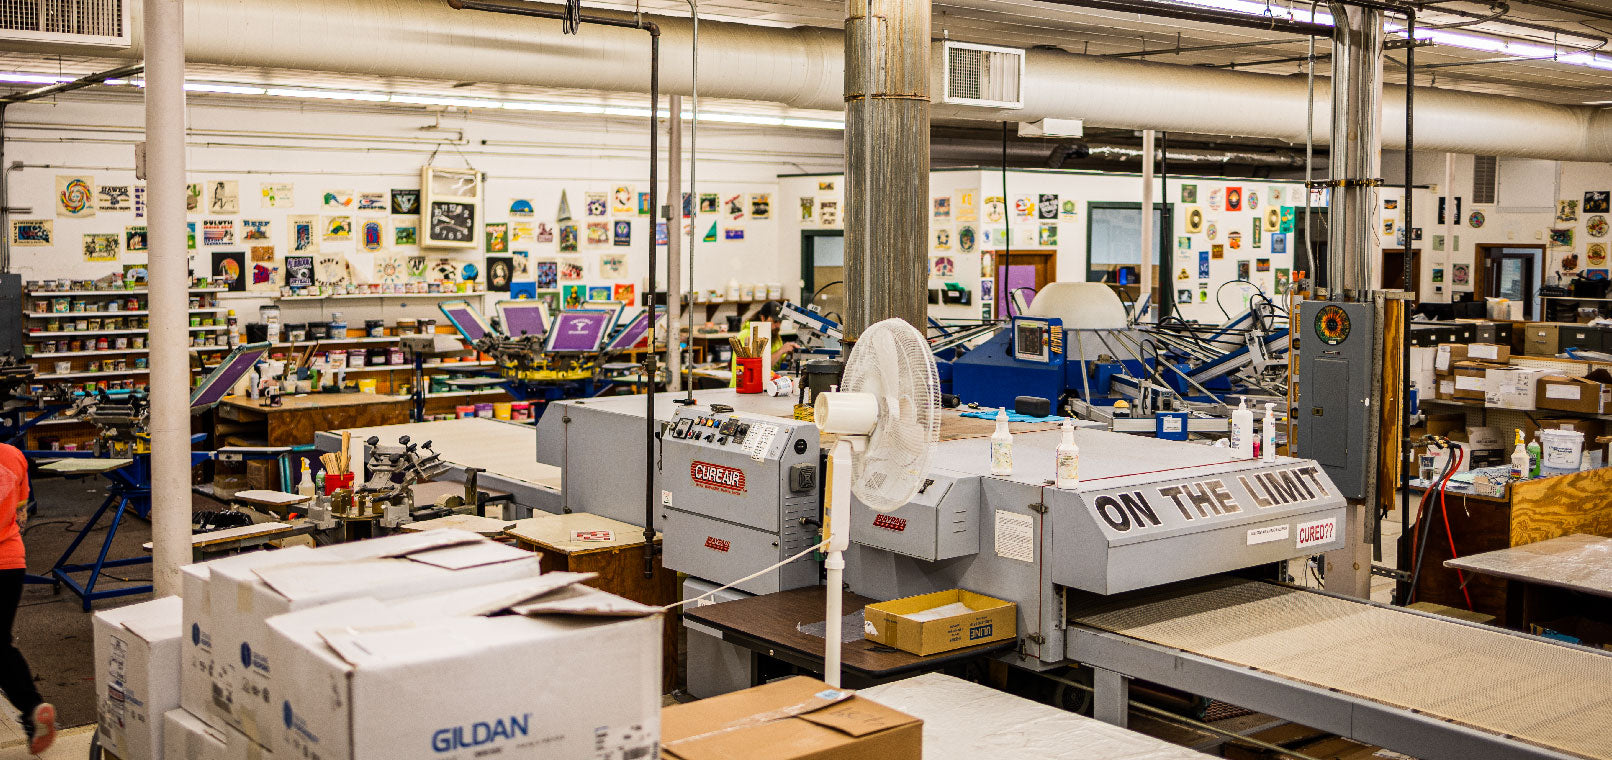 Inside view of the print department at On The Limit.